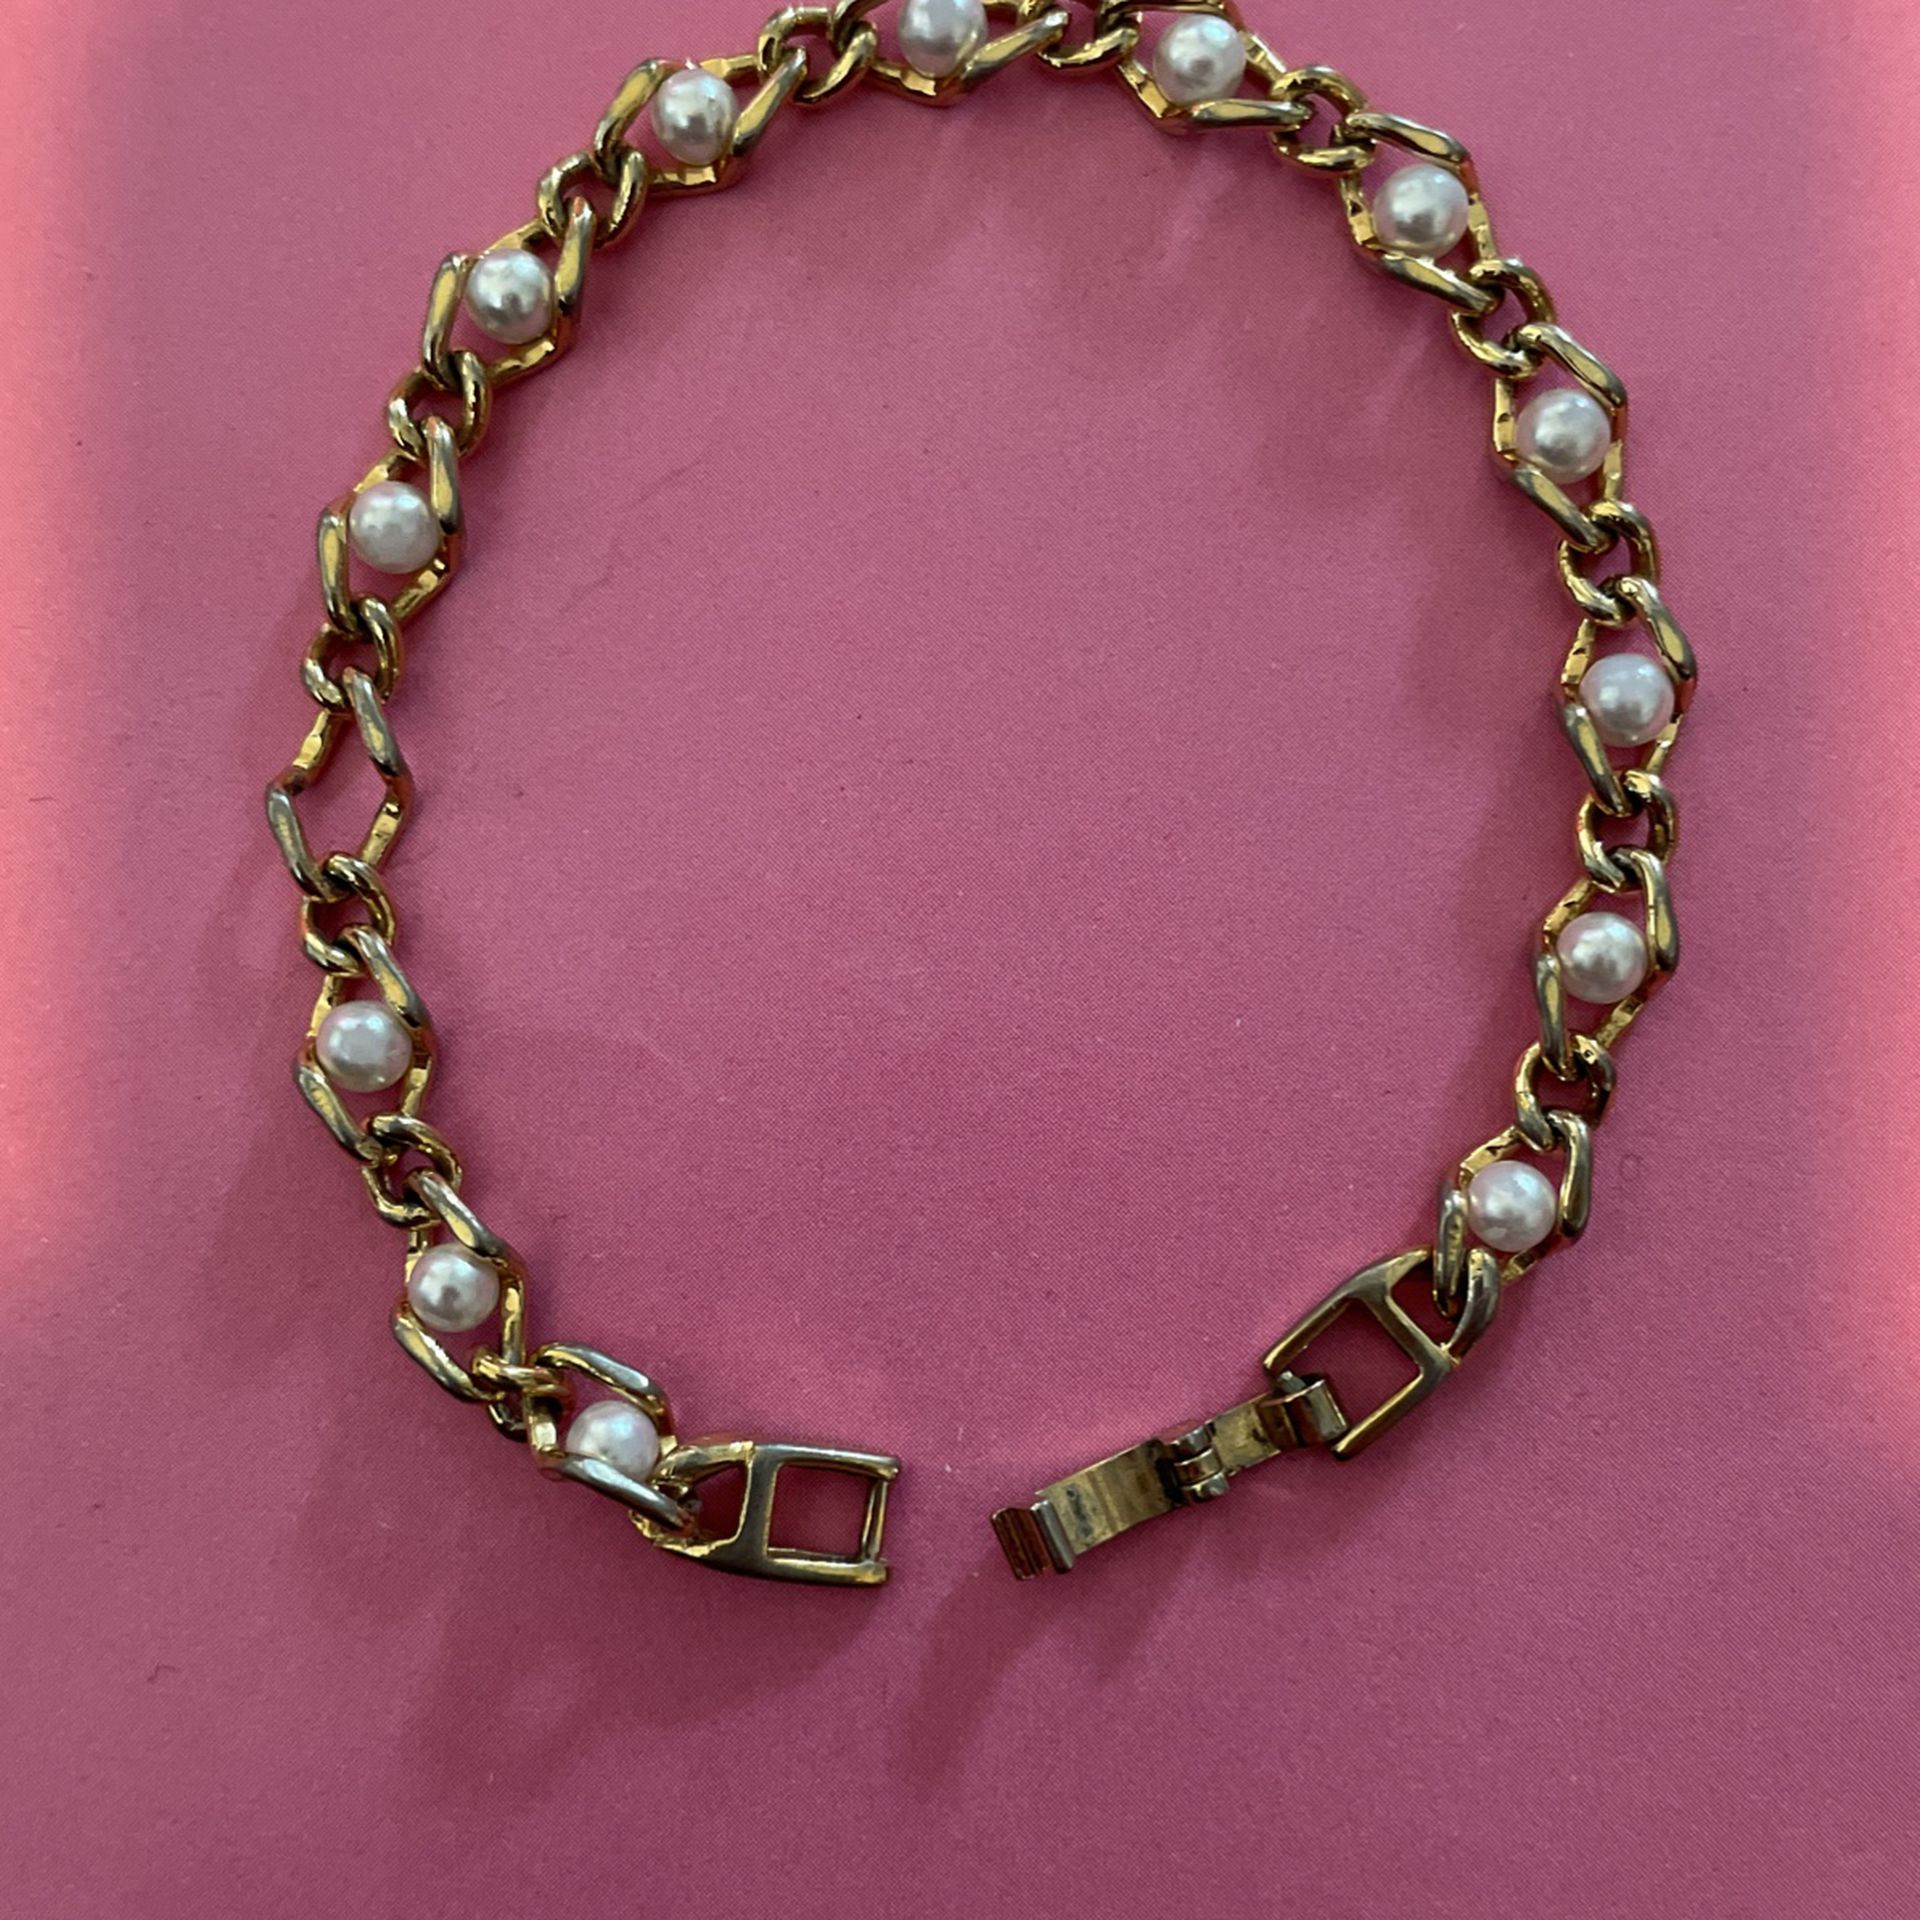 Real Gold And Pearl Chain Anklet/Bracelet